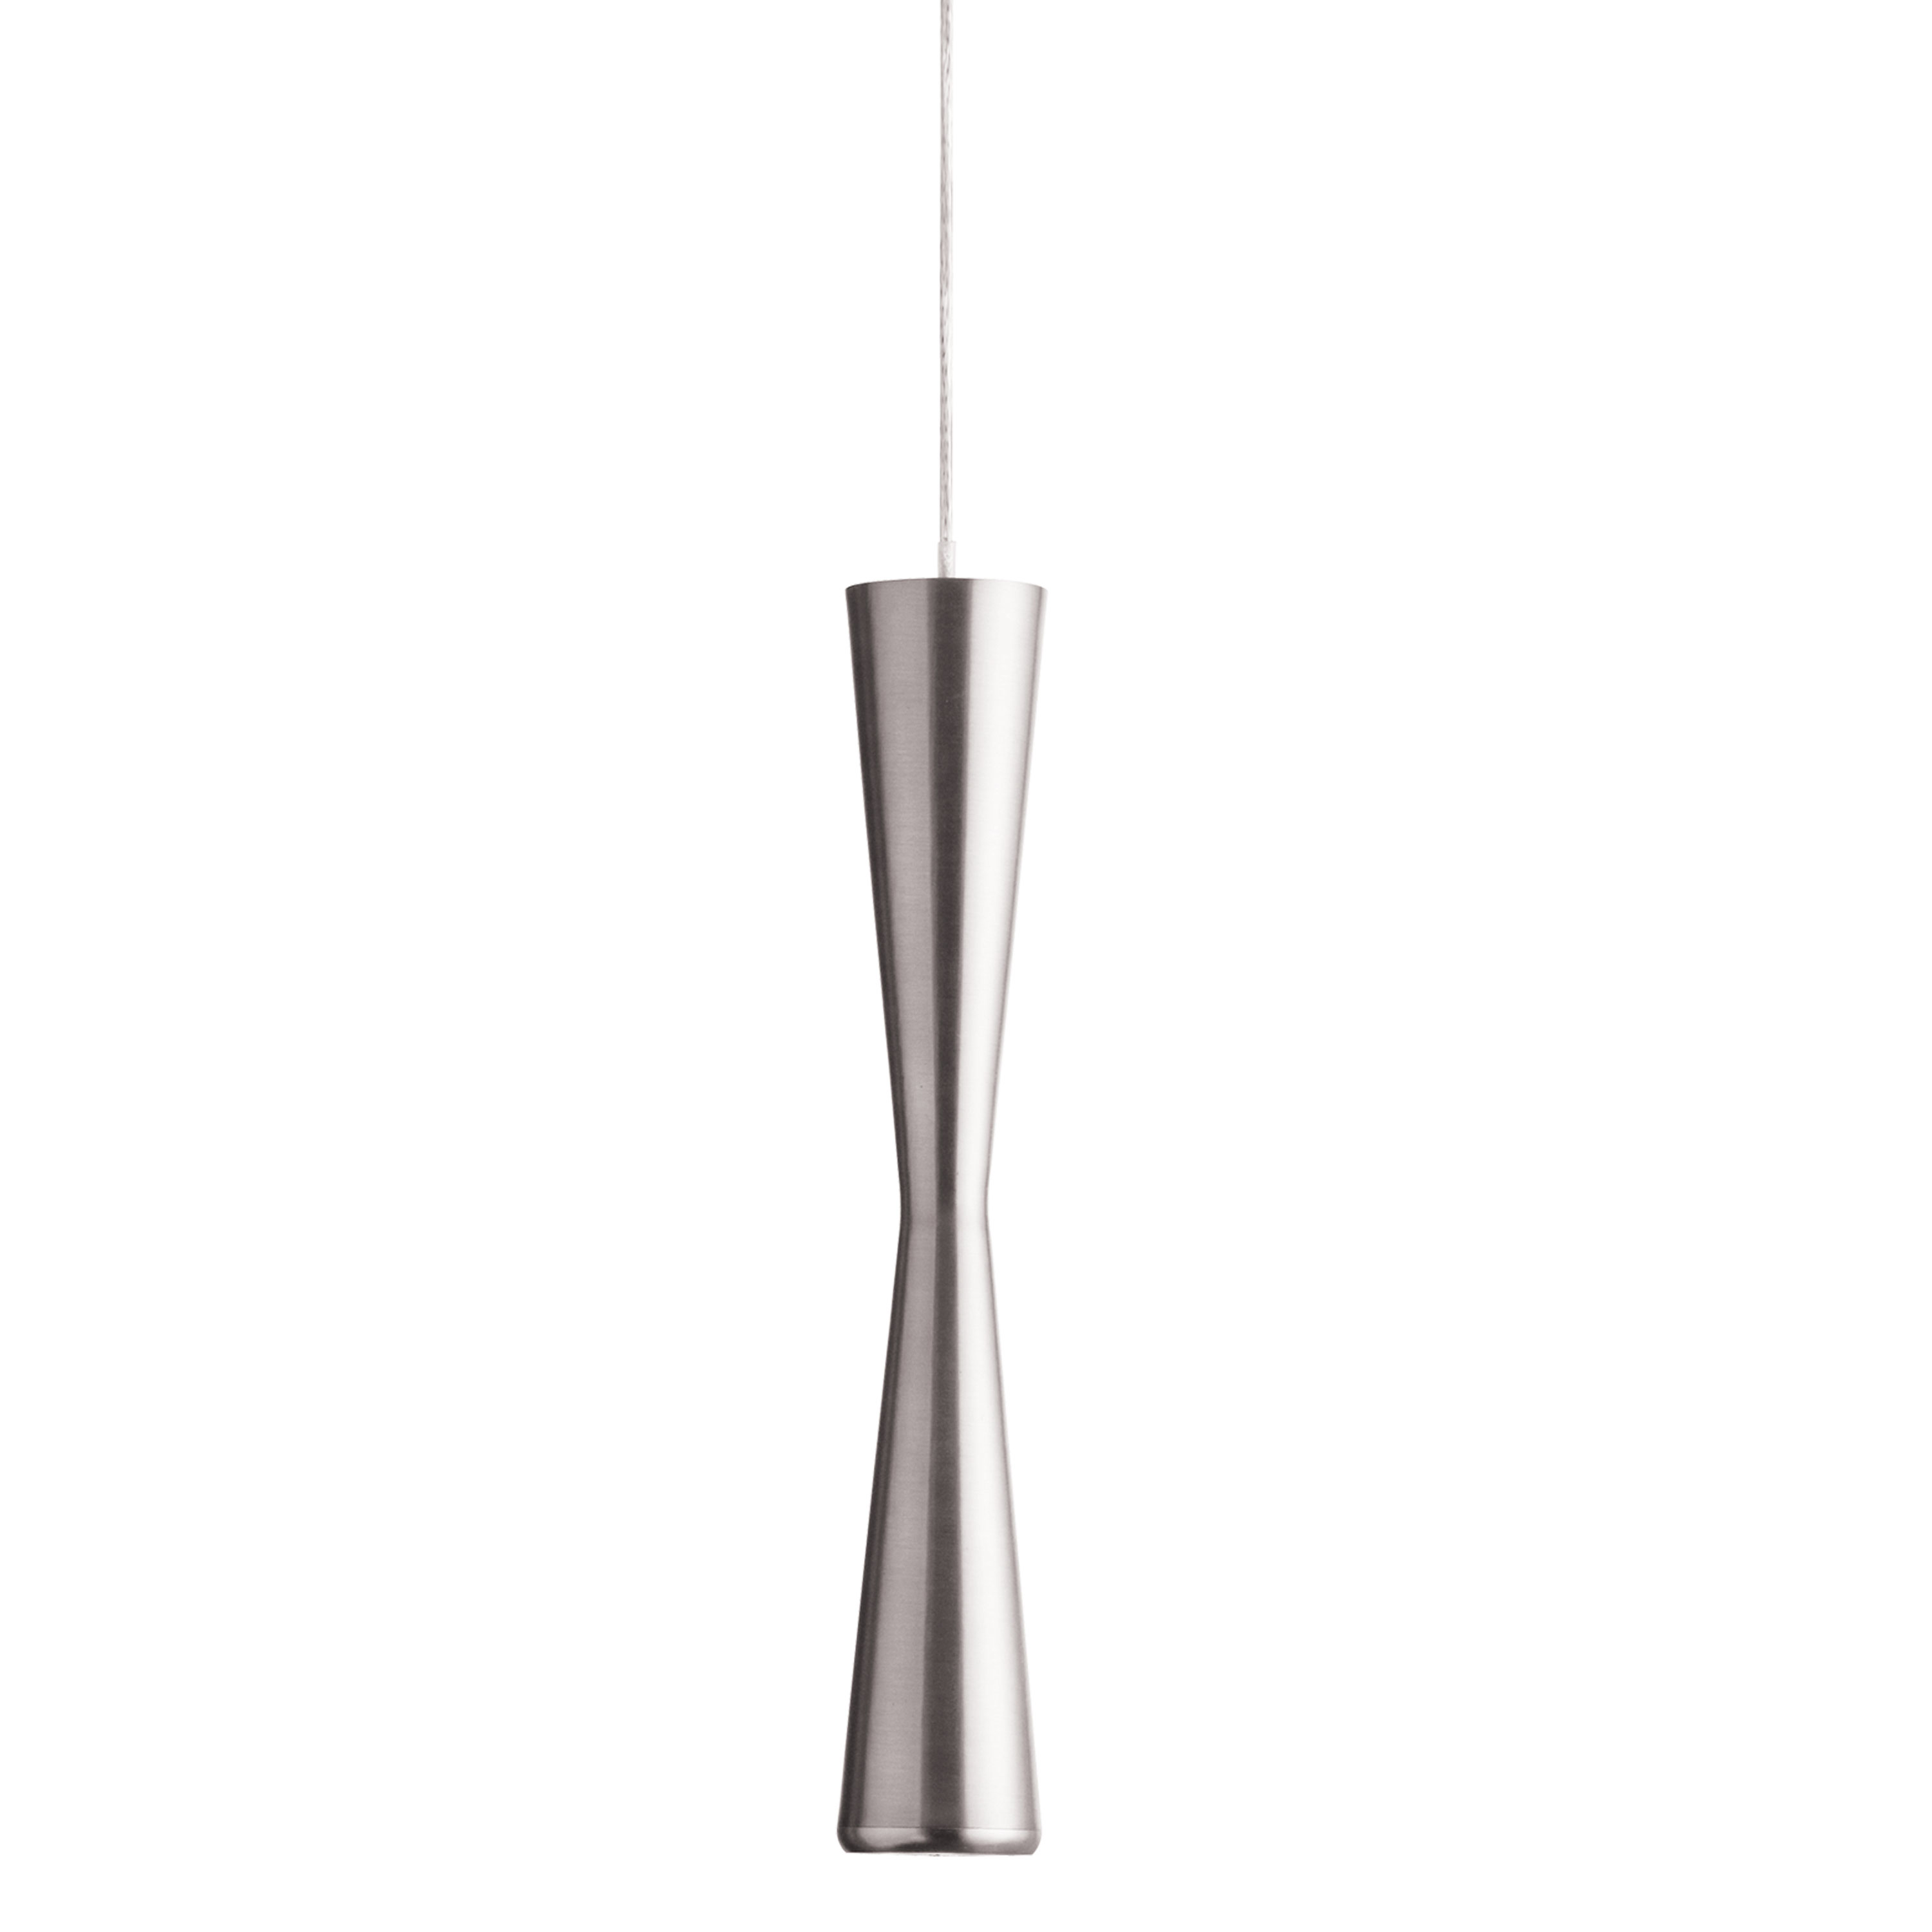 The Percita family of lighting has a svelte profile that gives it a sensual kind of appeal. The traditional drop design gets an artistic makeover with modern panache. The metal frame comes in your choice of finishes, with an elegantly tapered cylindrical form. It's a striking construction that is sure to draw the eye. With its eye-catching profile, Percita lighting will add a dash of fashionable flair to any main room of your home.